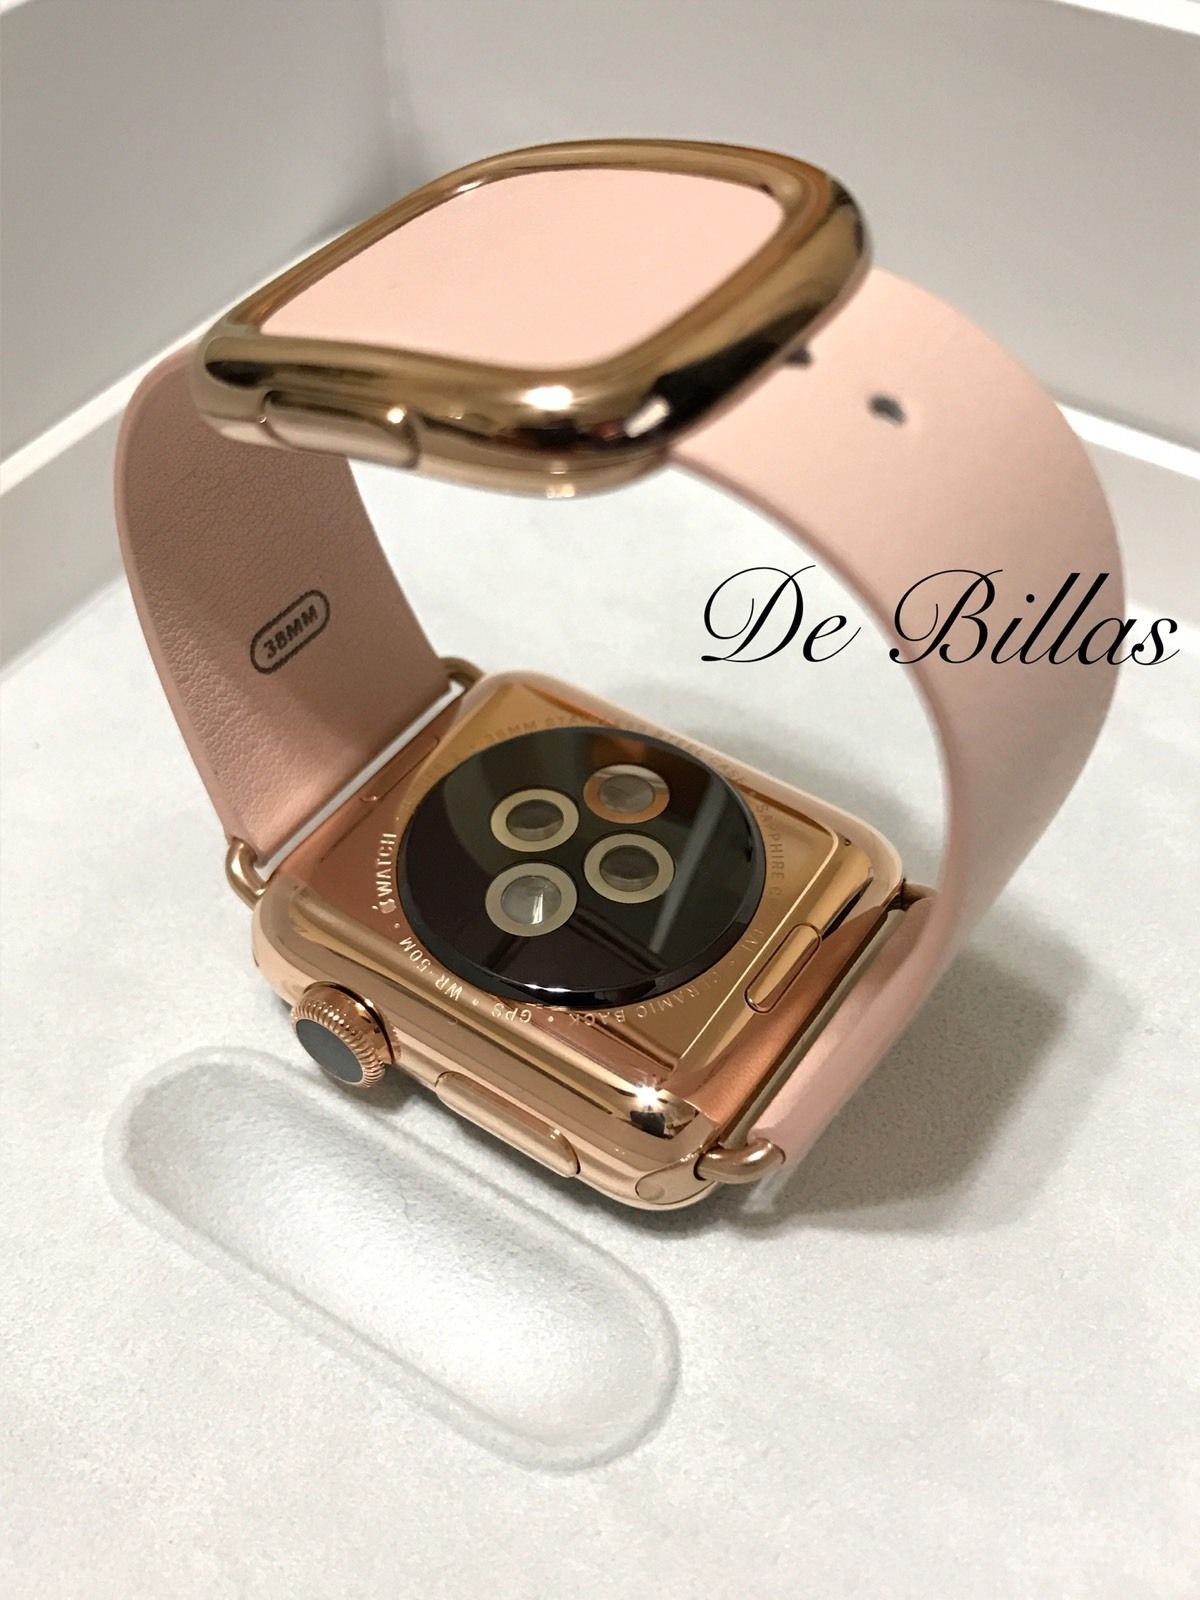 24K Rose Gold Plated 38mm Iwatch, Series 1 with Rose Modern Band - image 2 of 3